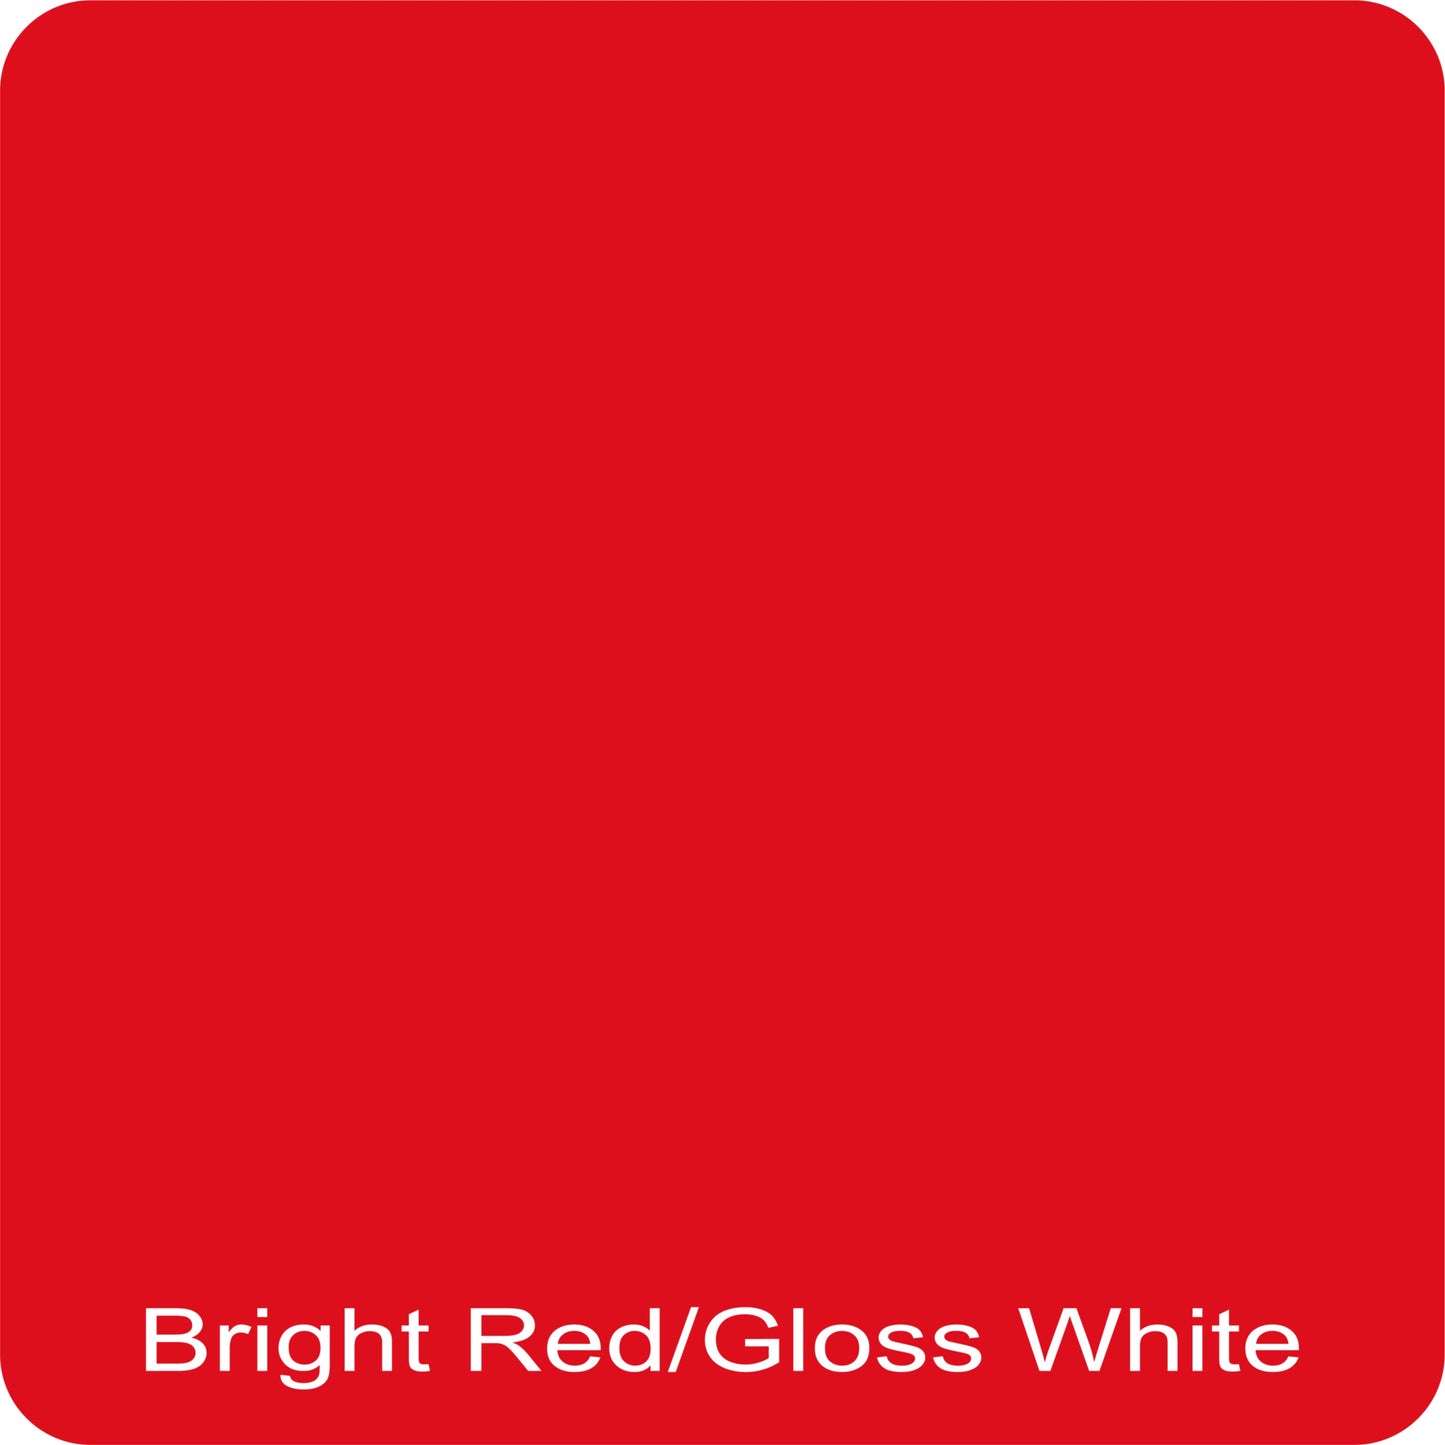 14" X 14" Bright Red / Gloss White Aluminum Sign Blank